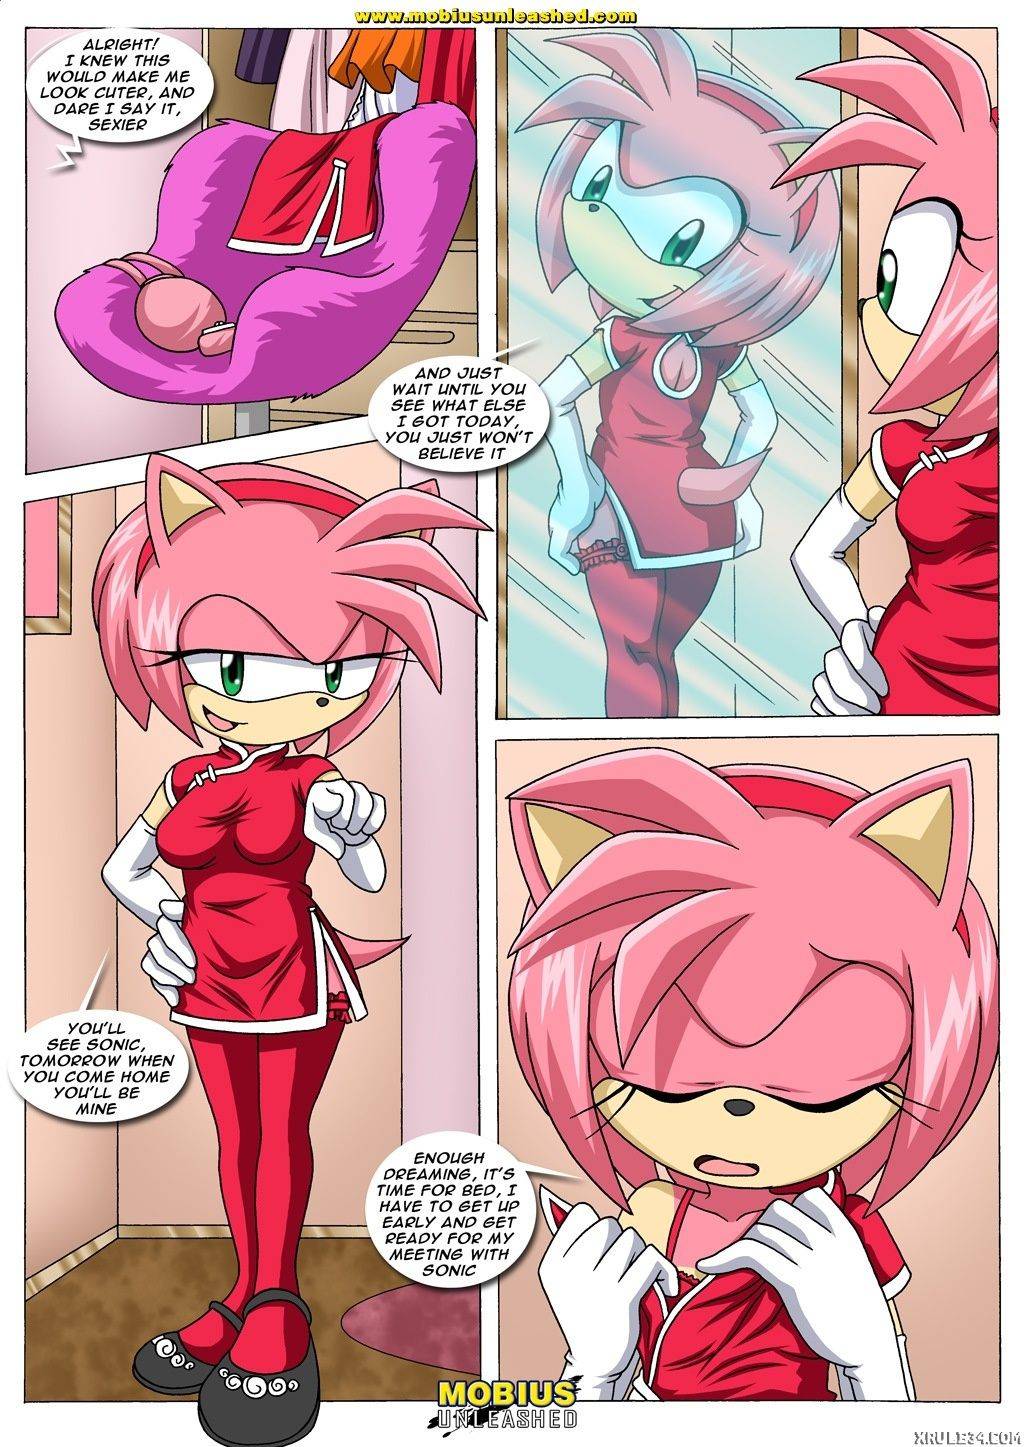 Sonic having sex with amy on the bed